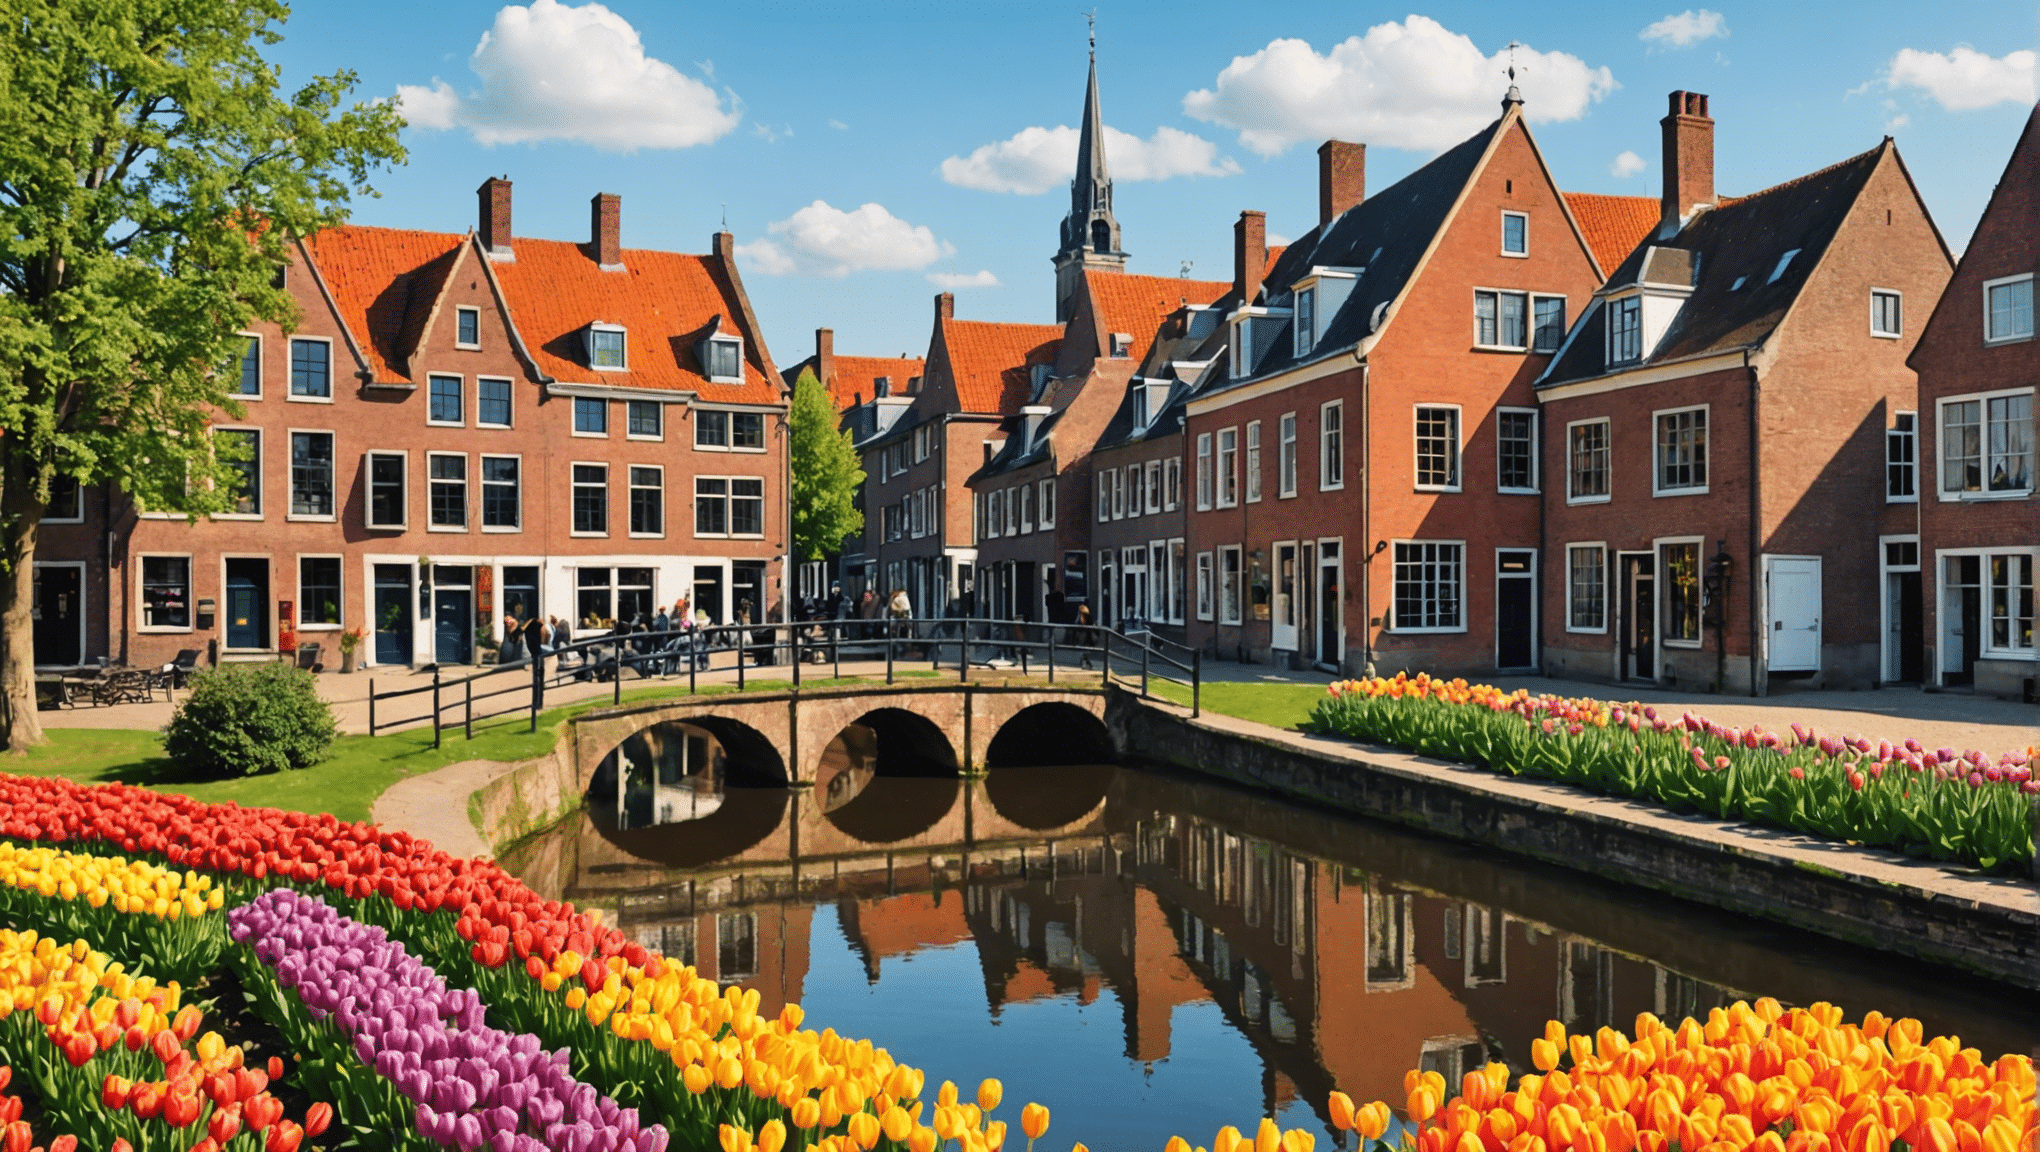 discover the charms of the Netherlands on an unforgettable journey through this country of iconic windmills, magnificent tulip fields and charming canals.